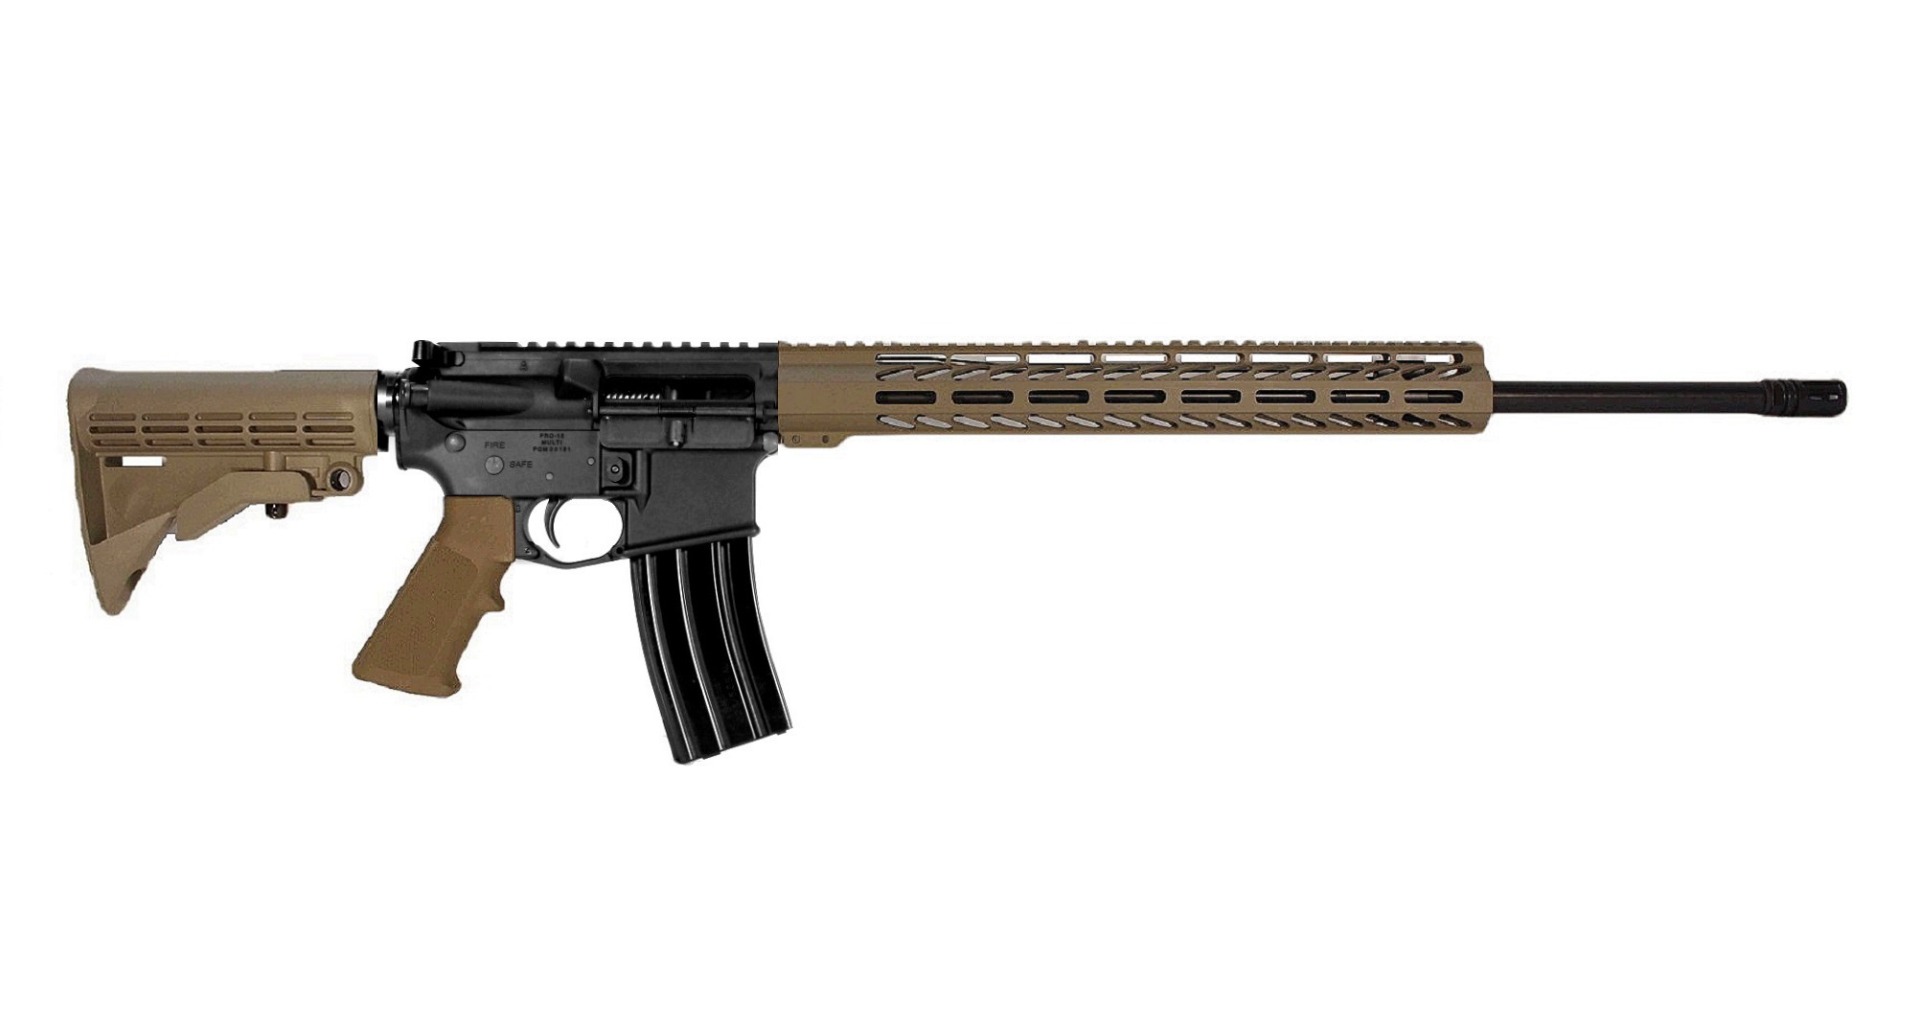 22 inch 224 Valkyrie AR Rifle in BLK/FDE